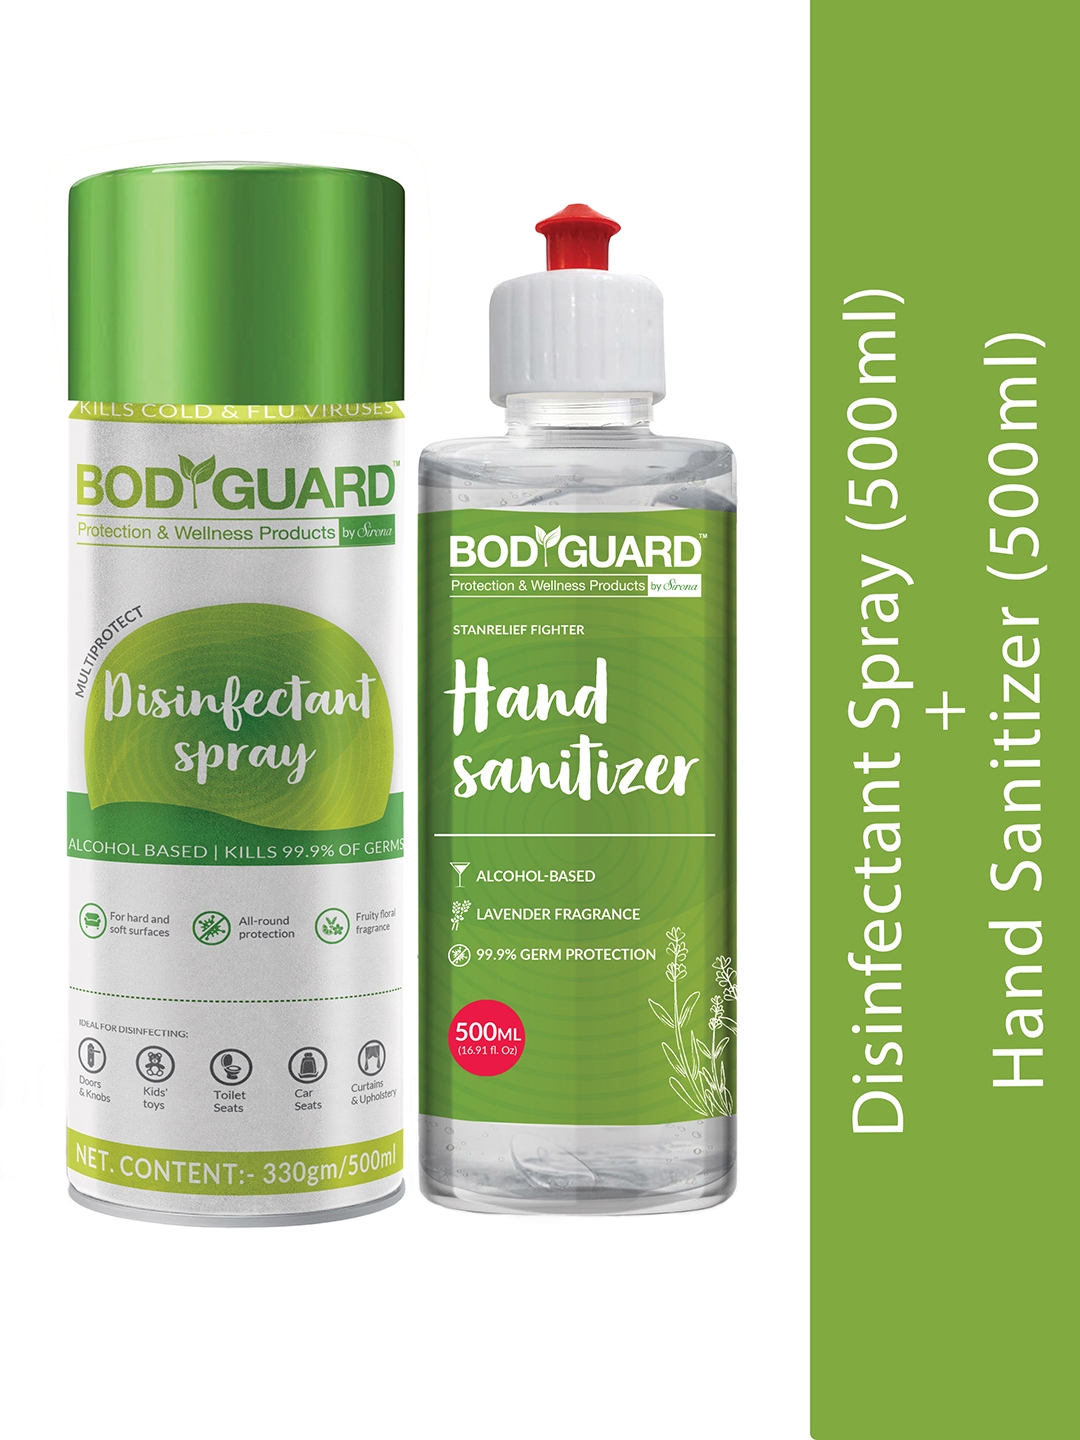 BOD GUARD Set of Alcohol Based Disinfectant Spray   500 ml, Hand Sanitizer   500 ml